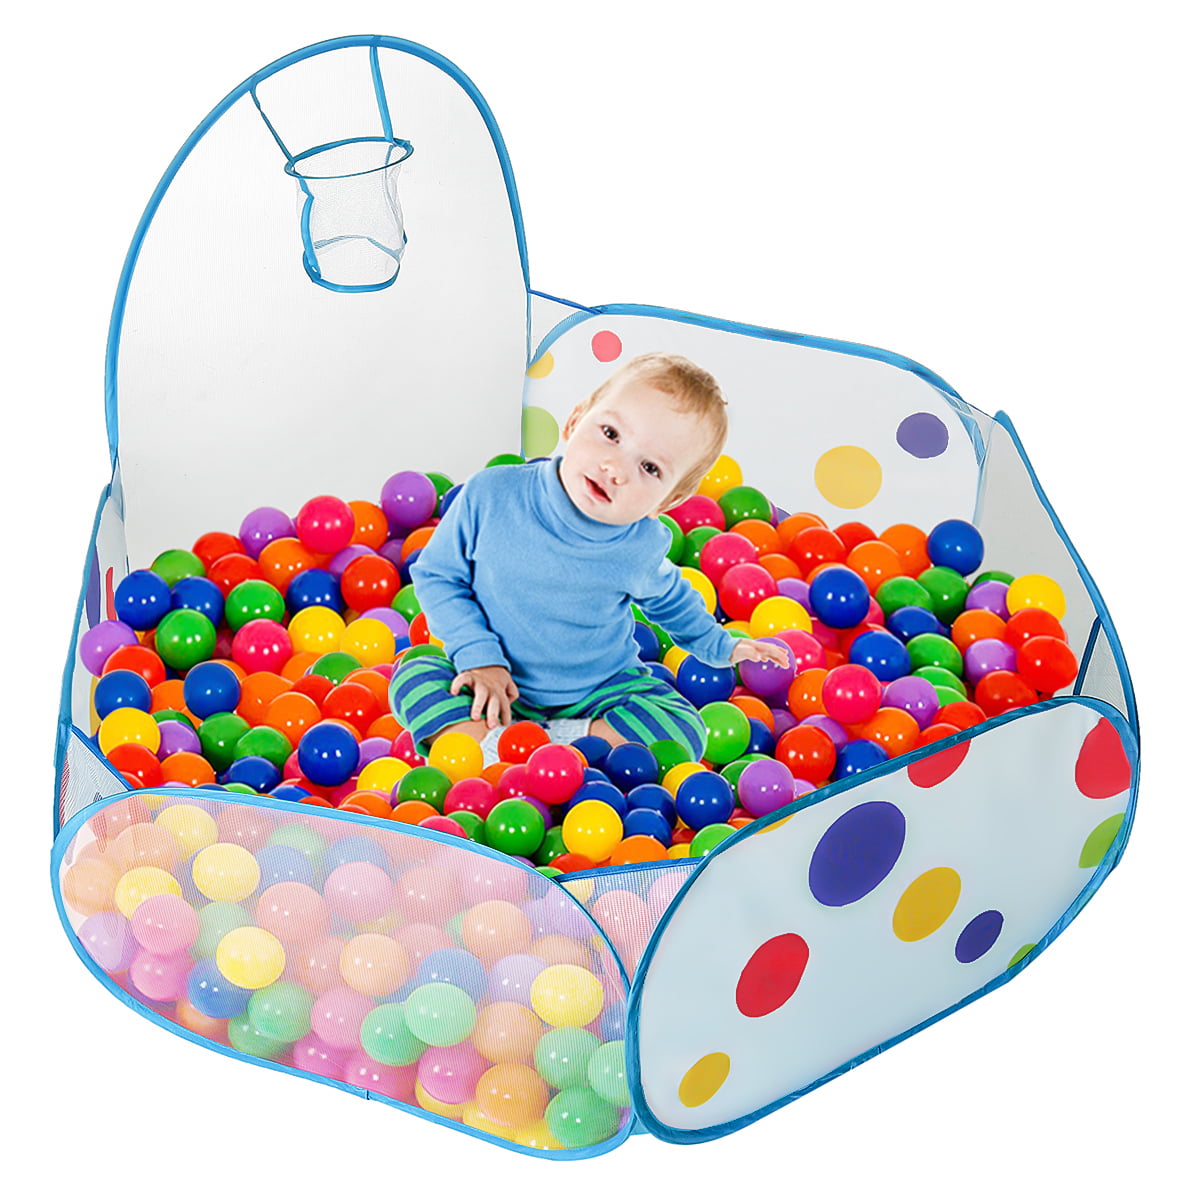 Easy Folding Kids Baby Toy Pool Indoor Tent Ocean Ball Pit Children Game Play 